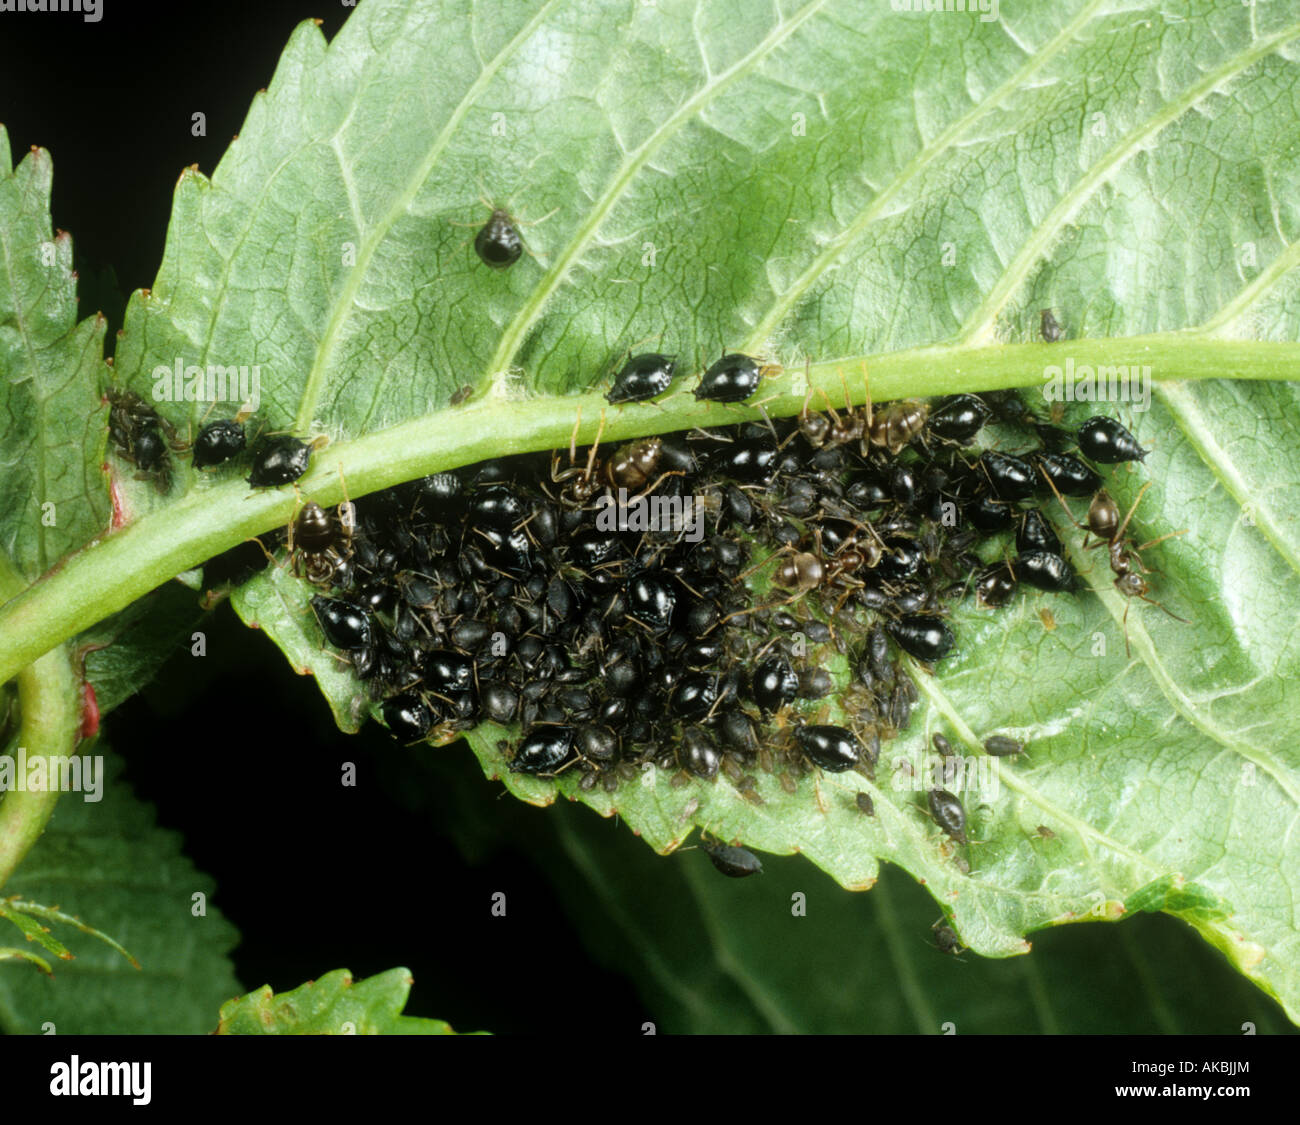 Black cherry aphid Myzus cerasi infestation on a cherry leaf with ants guarding Stock Photo